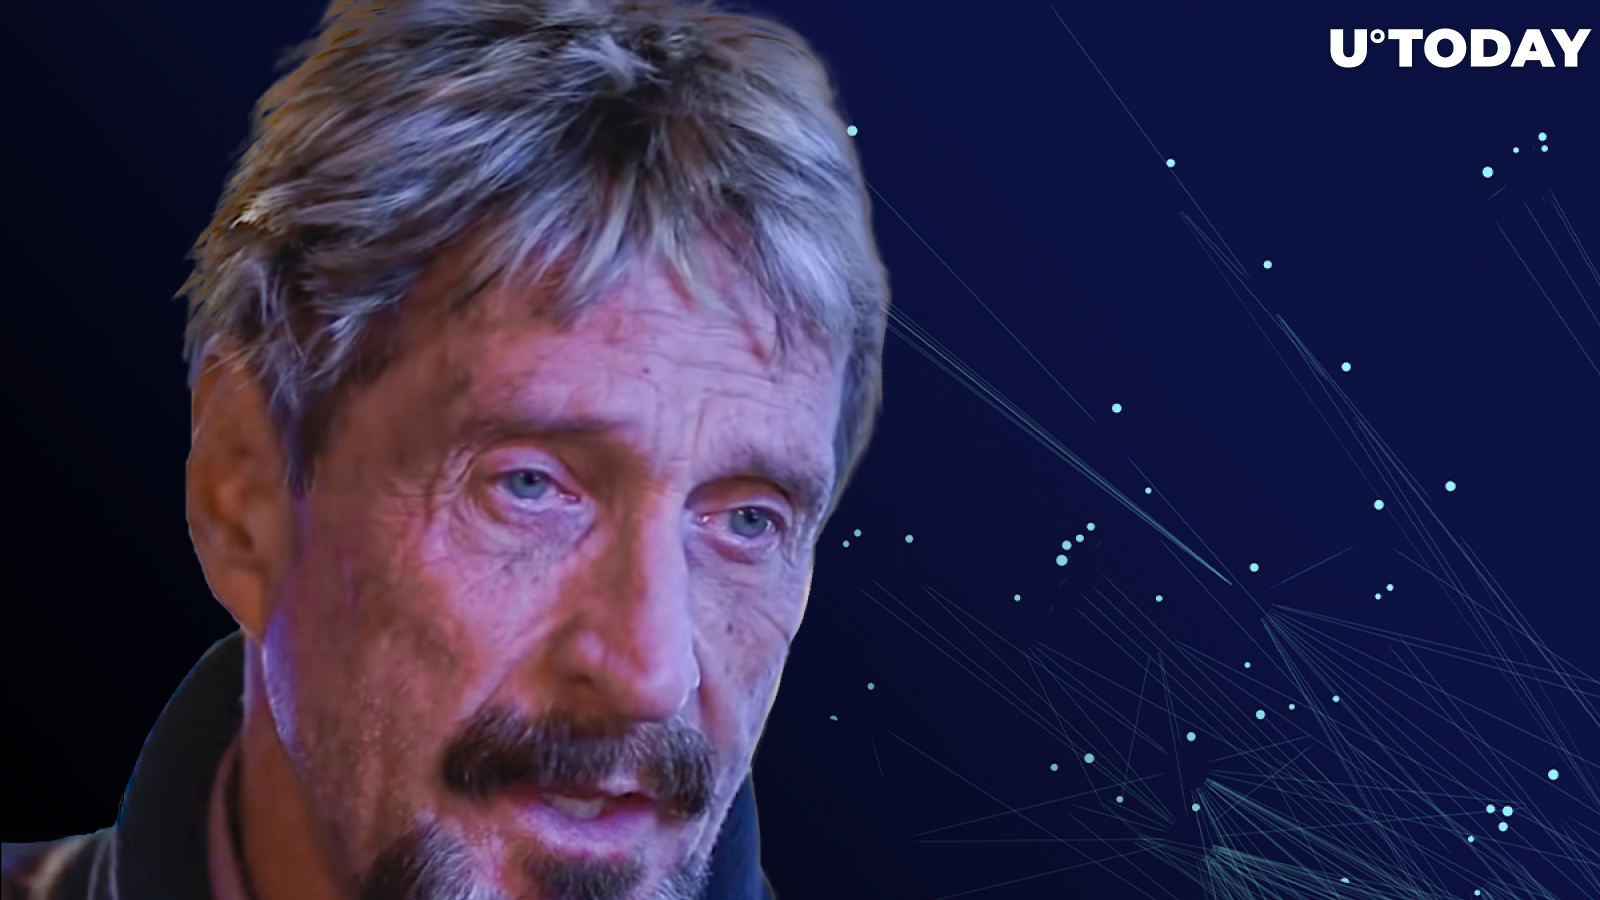 Rest in Peace, John. U.Today Recalls Last Year’s Interview With John McAfee